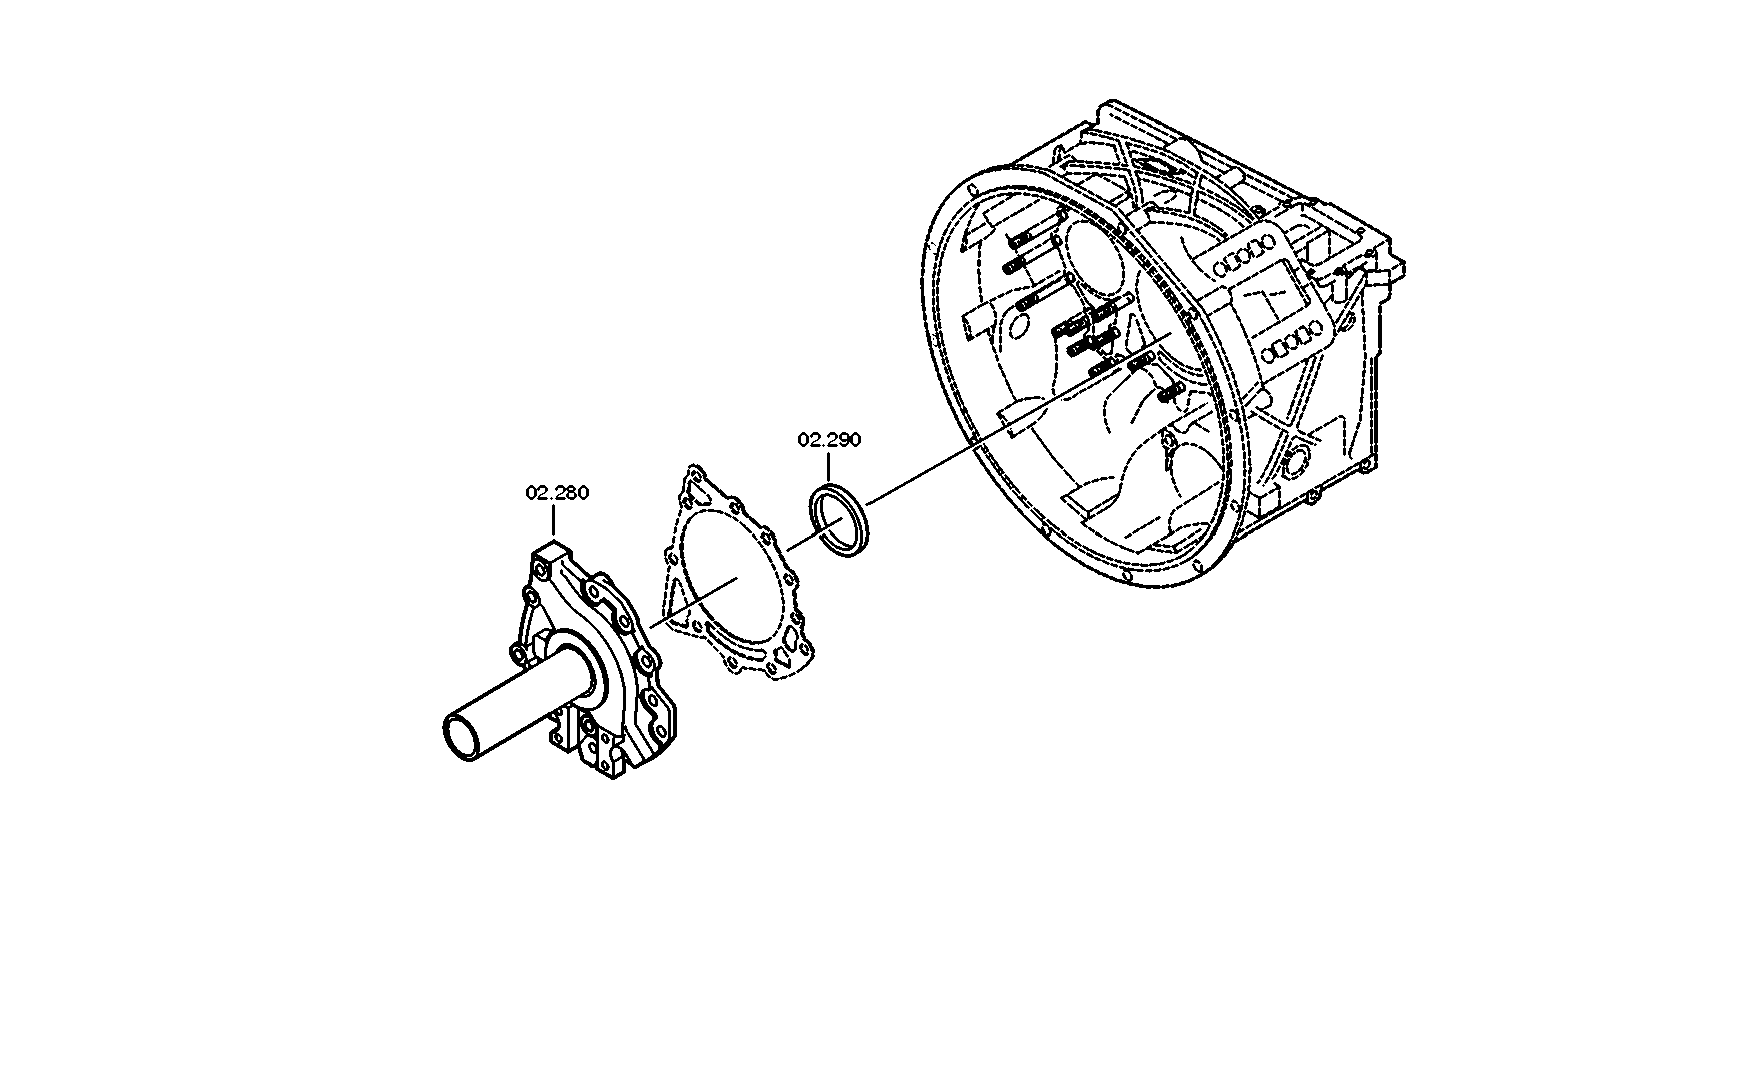 drawing for DAF 1295188 - CONNECTION PLATE (figure 2)